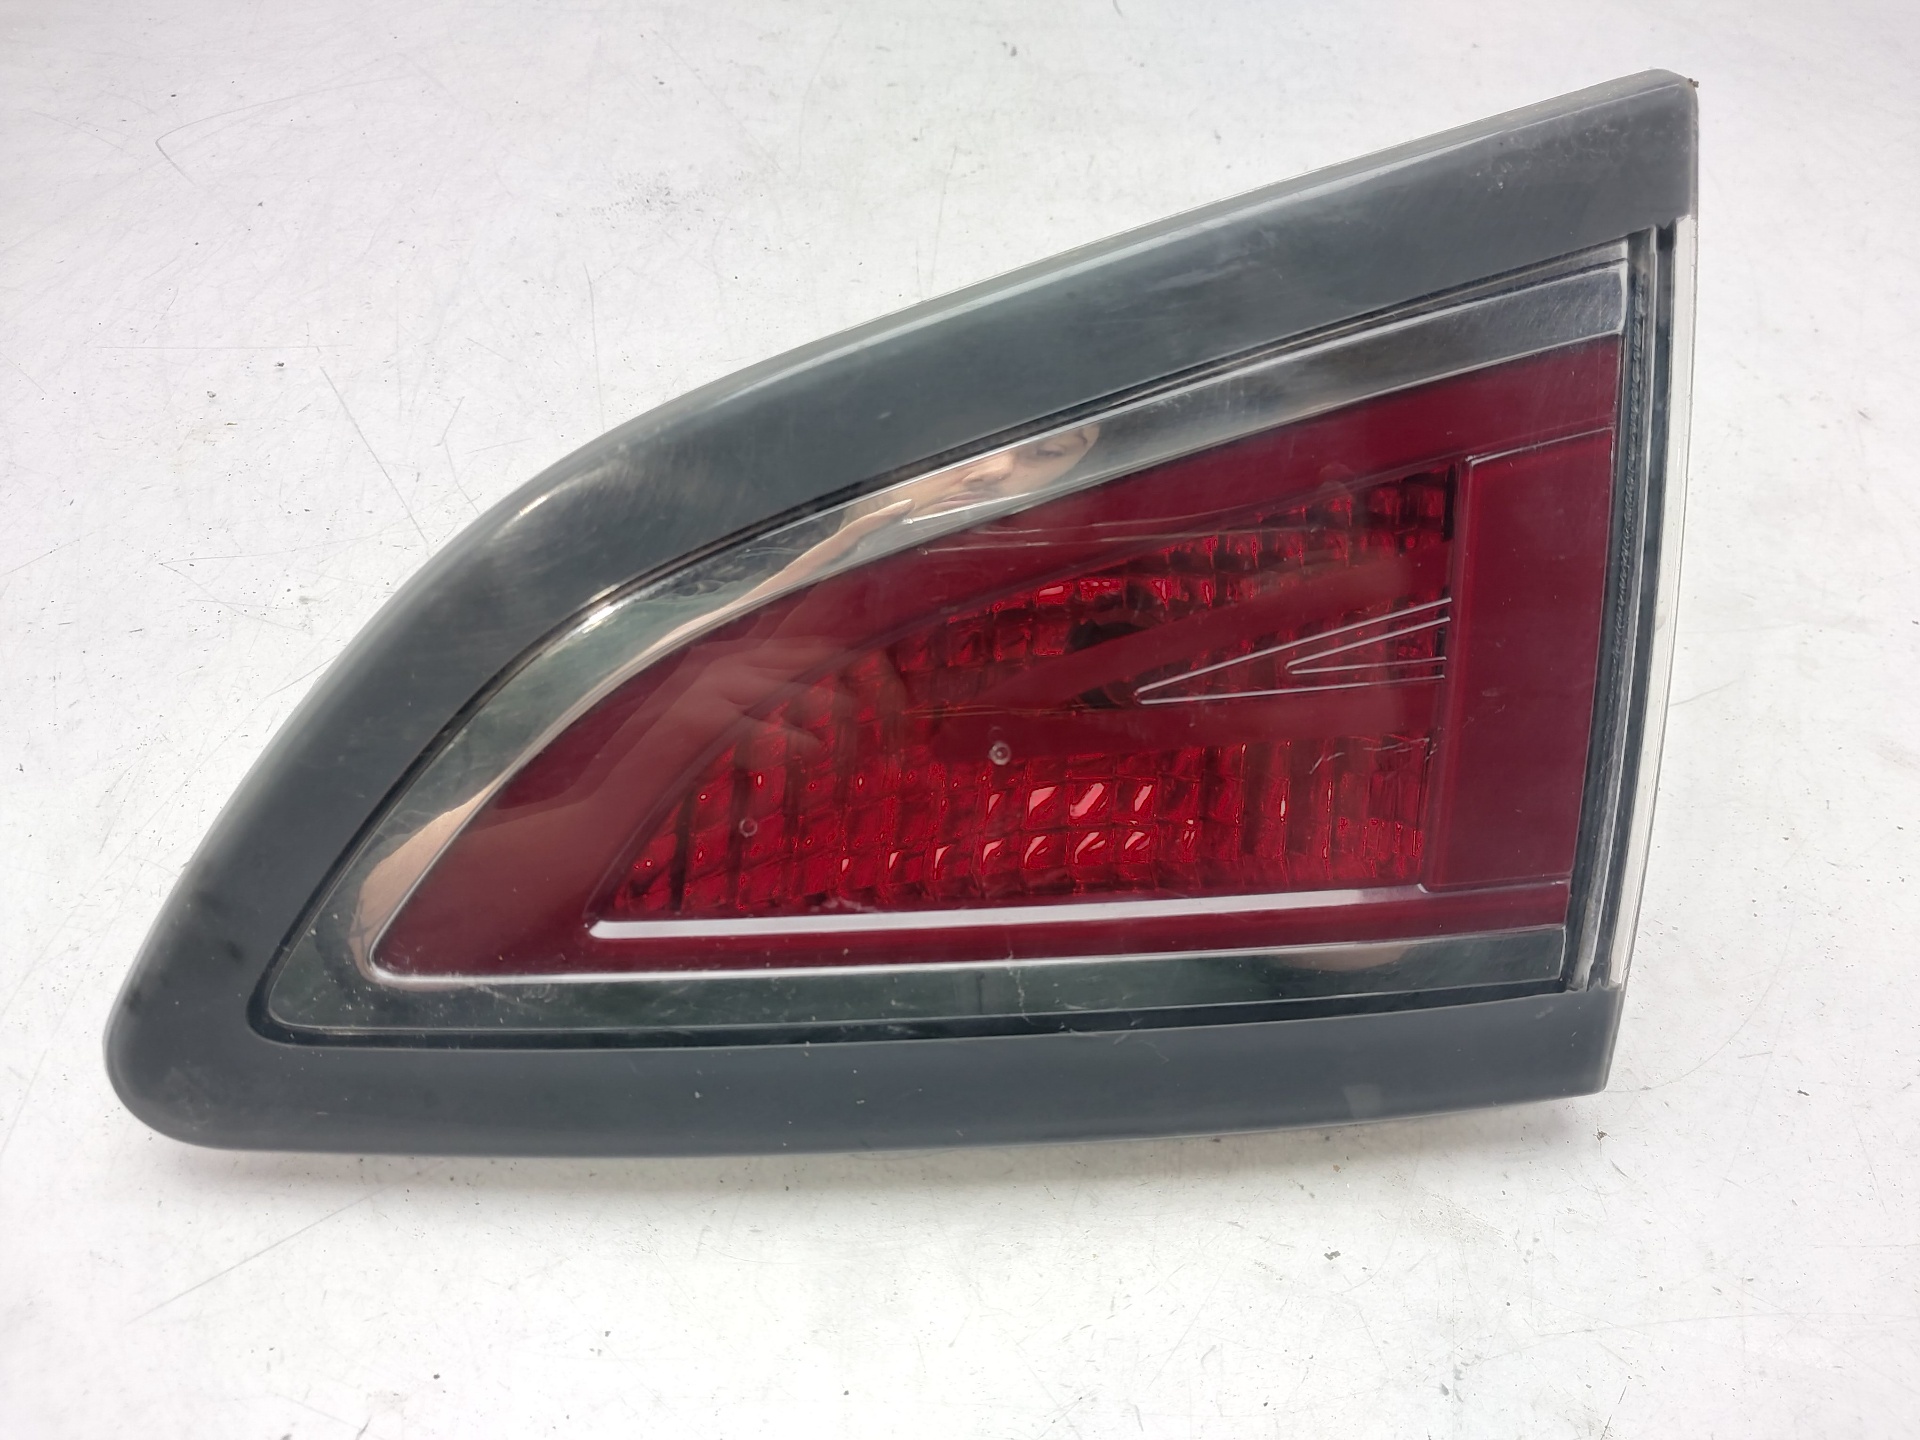 RENAULT Scenic 3 generation (2009-2015) Rear Right Taillight Lamp 265550018R 24121752